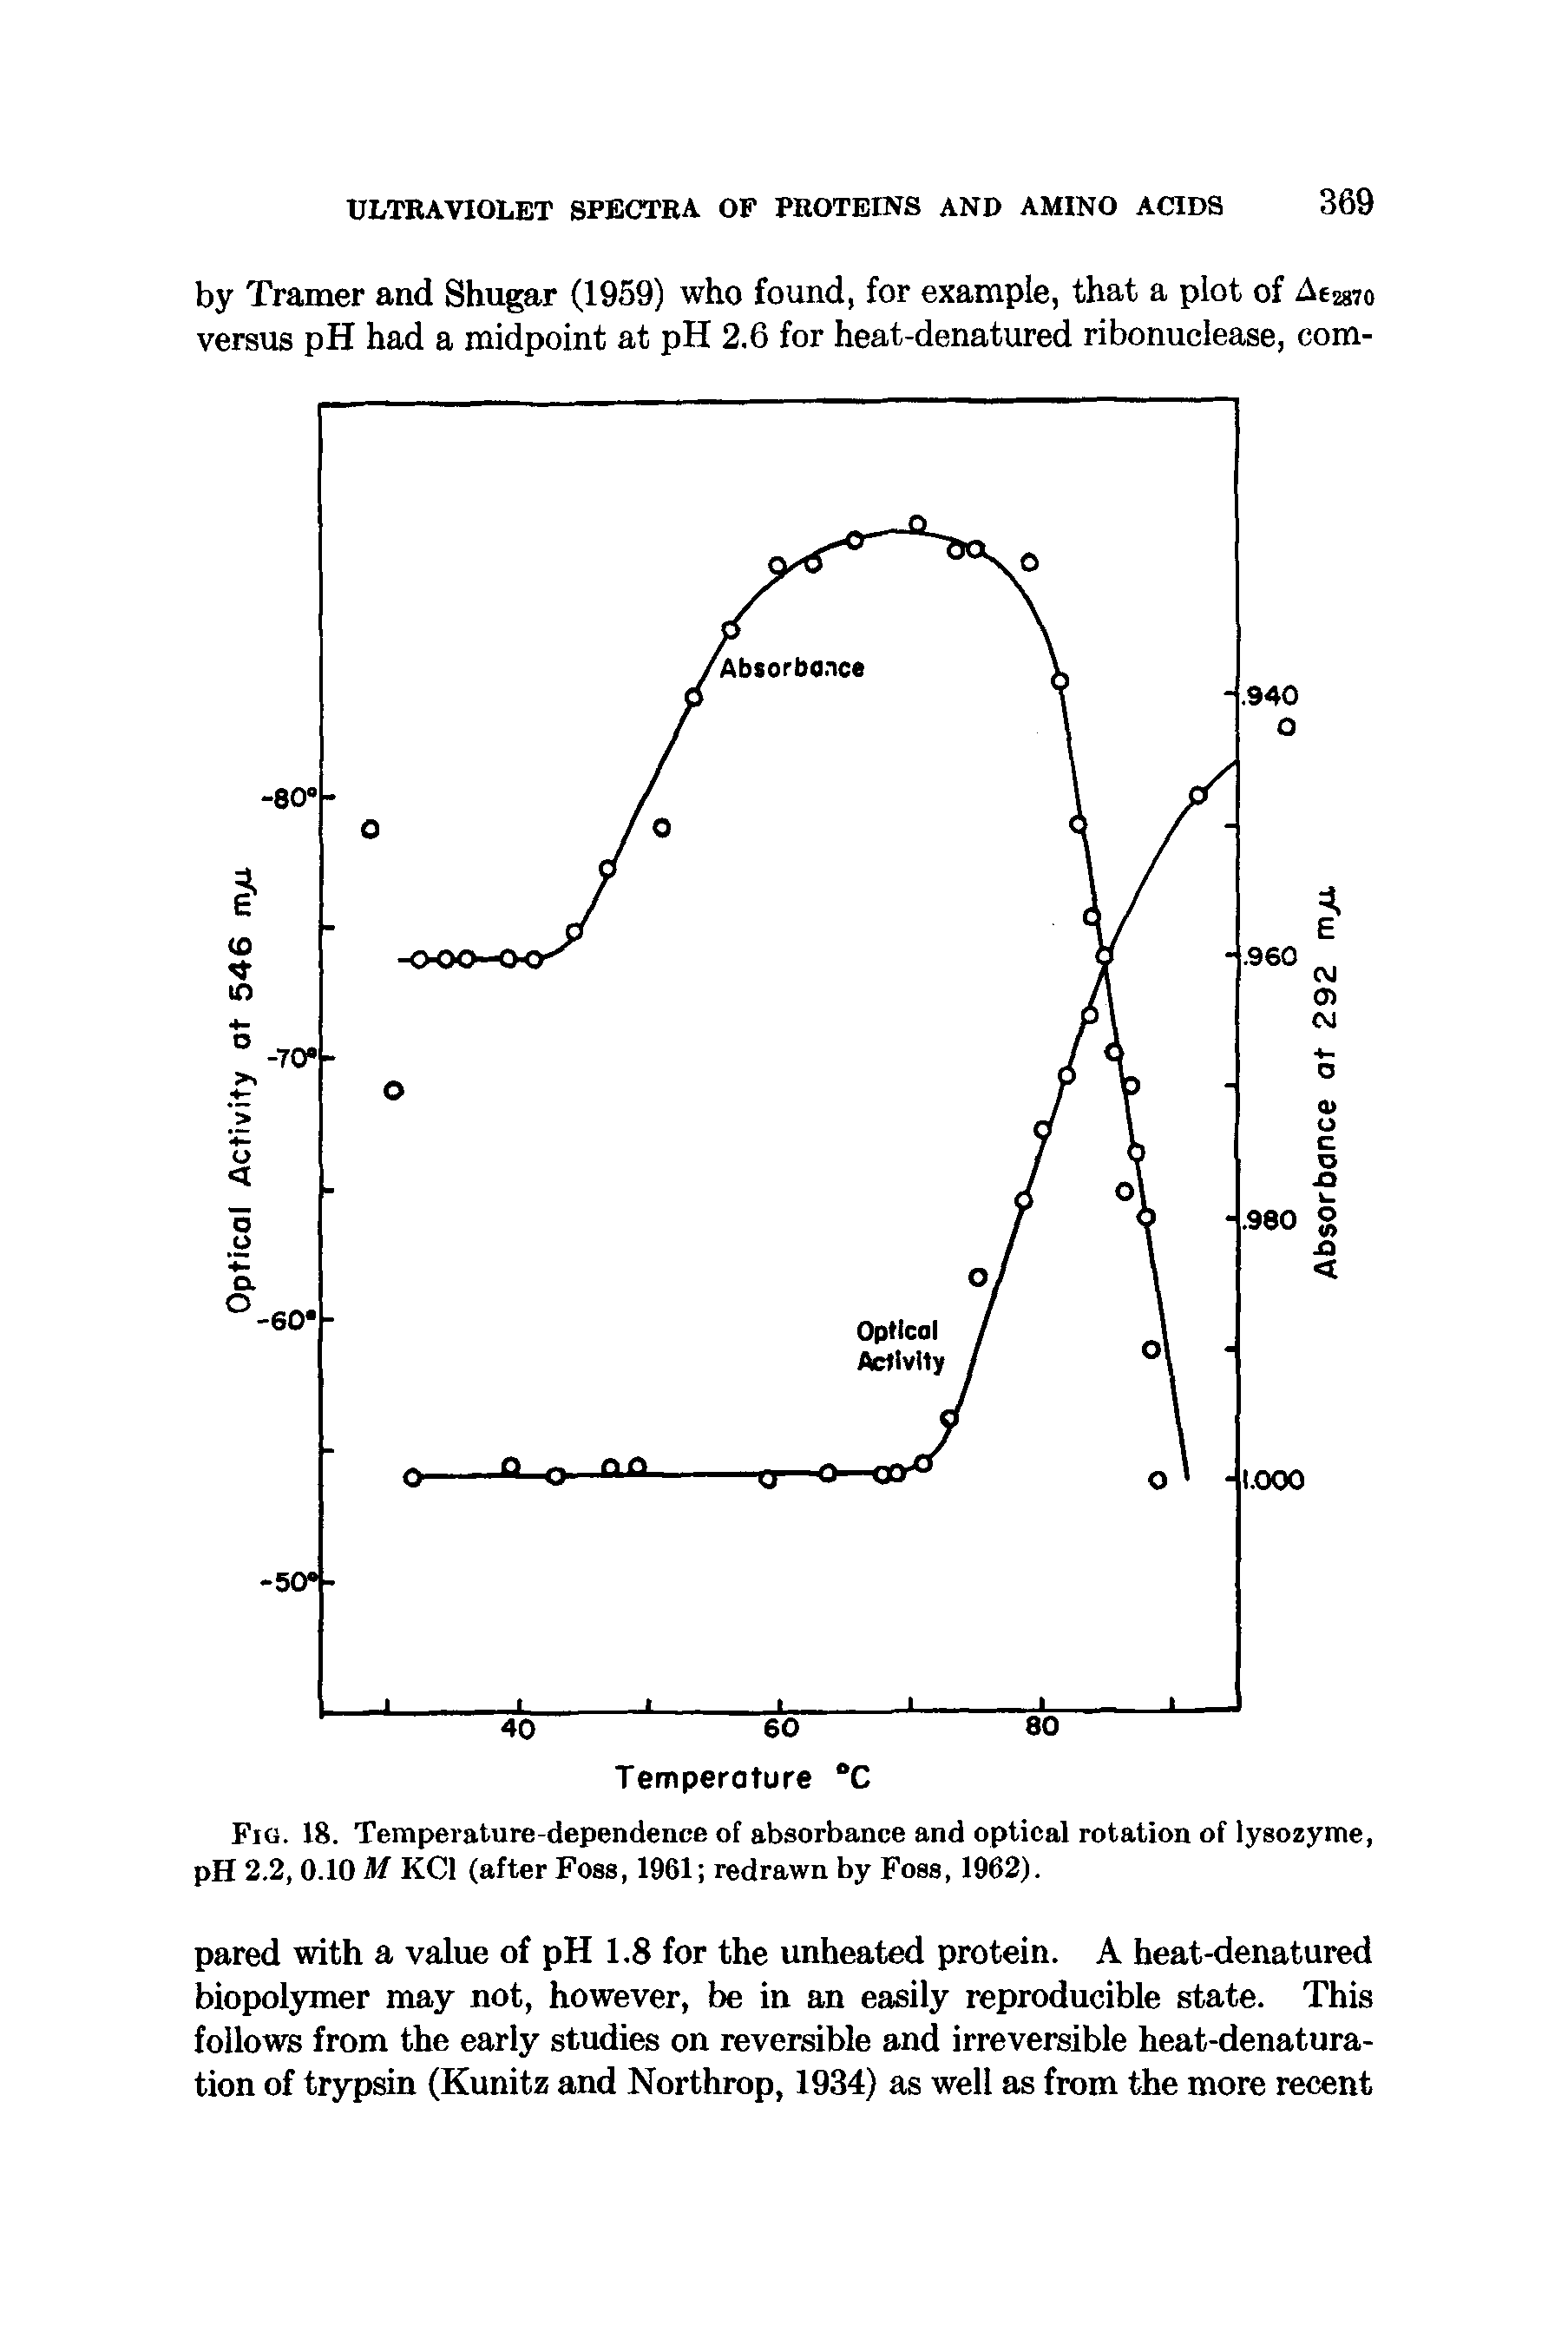 Fig. 18. Temperature-dependence of absorbance and optical rotation of lysozyme, pH 2.2, 0.10 M KCl (after Foss, 1961 redrawn by Foss, 1962).